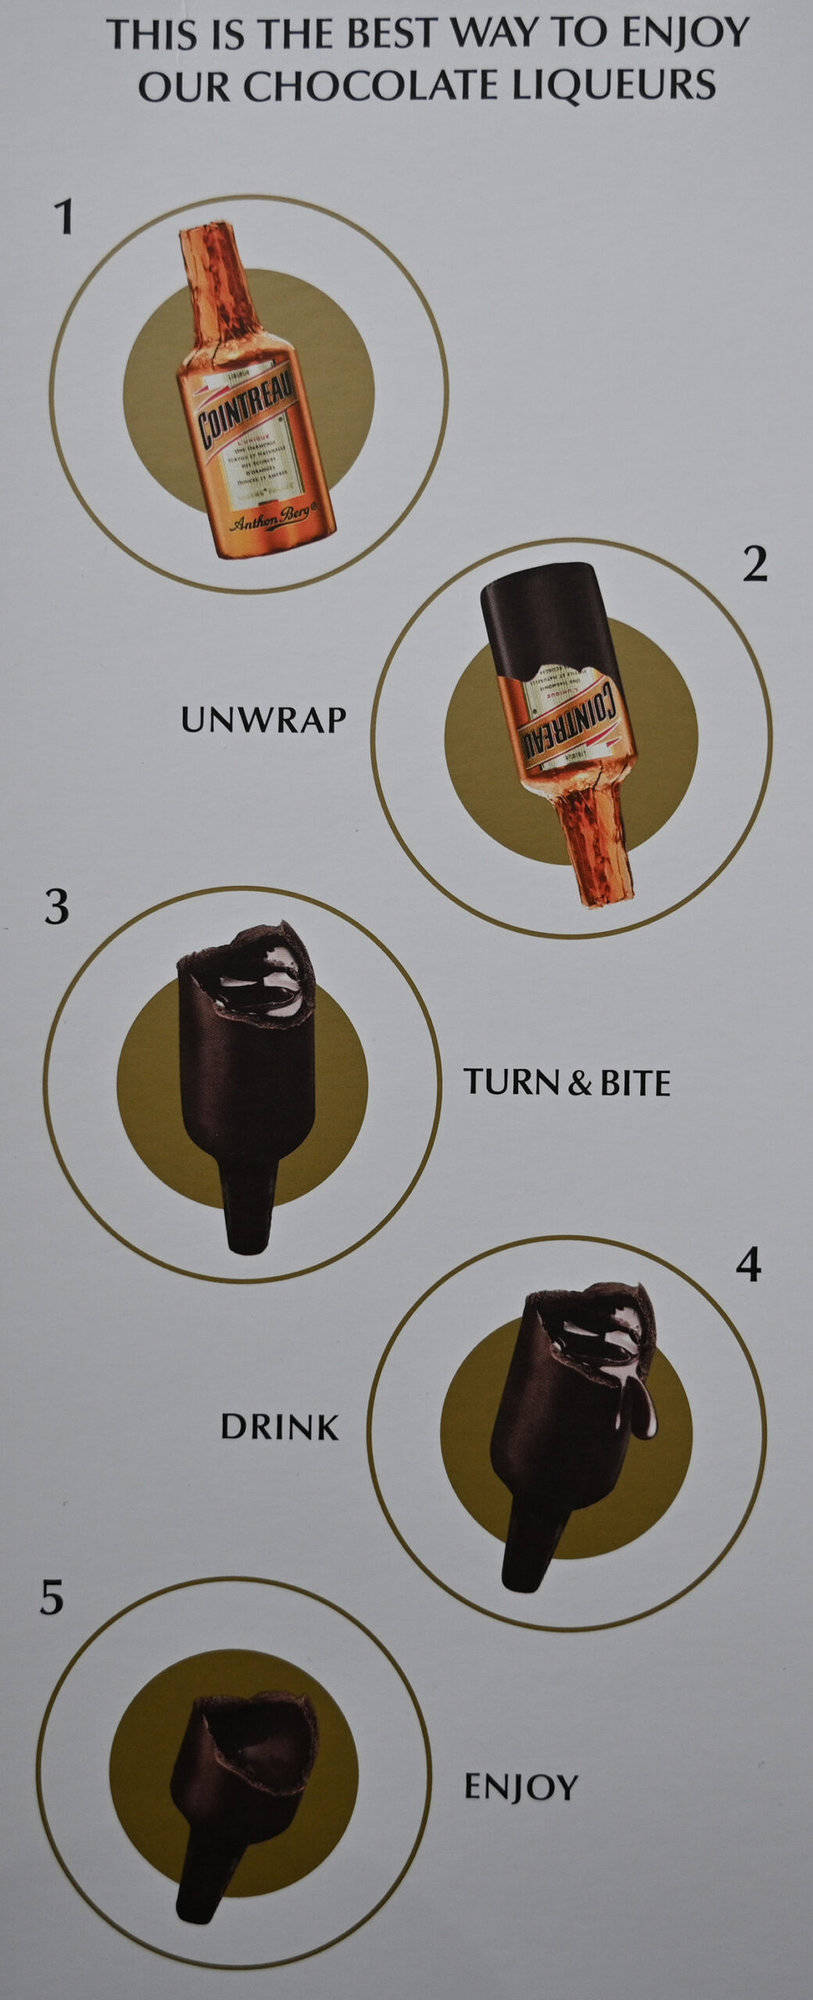 Image showing how to eat/drink the liquor-filled chocolates from the back of the box.